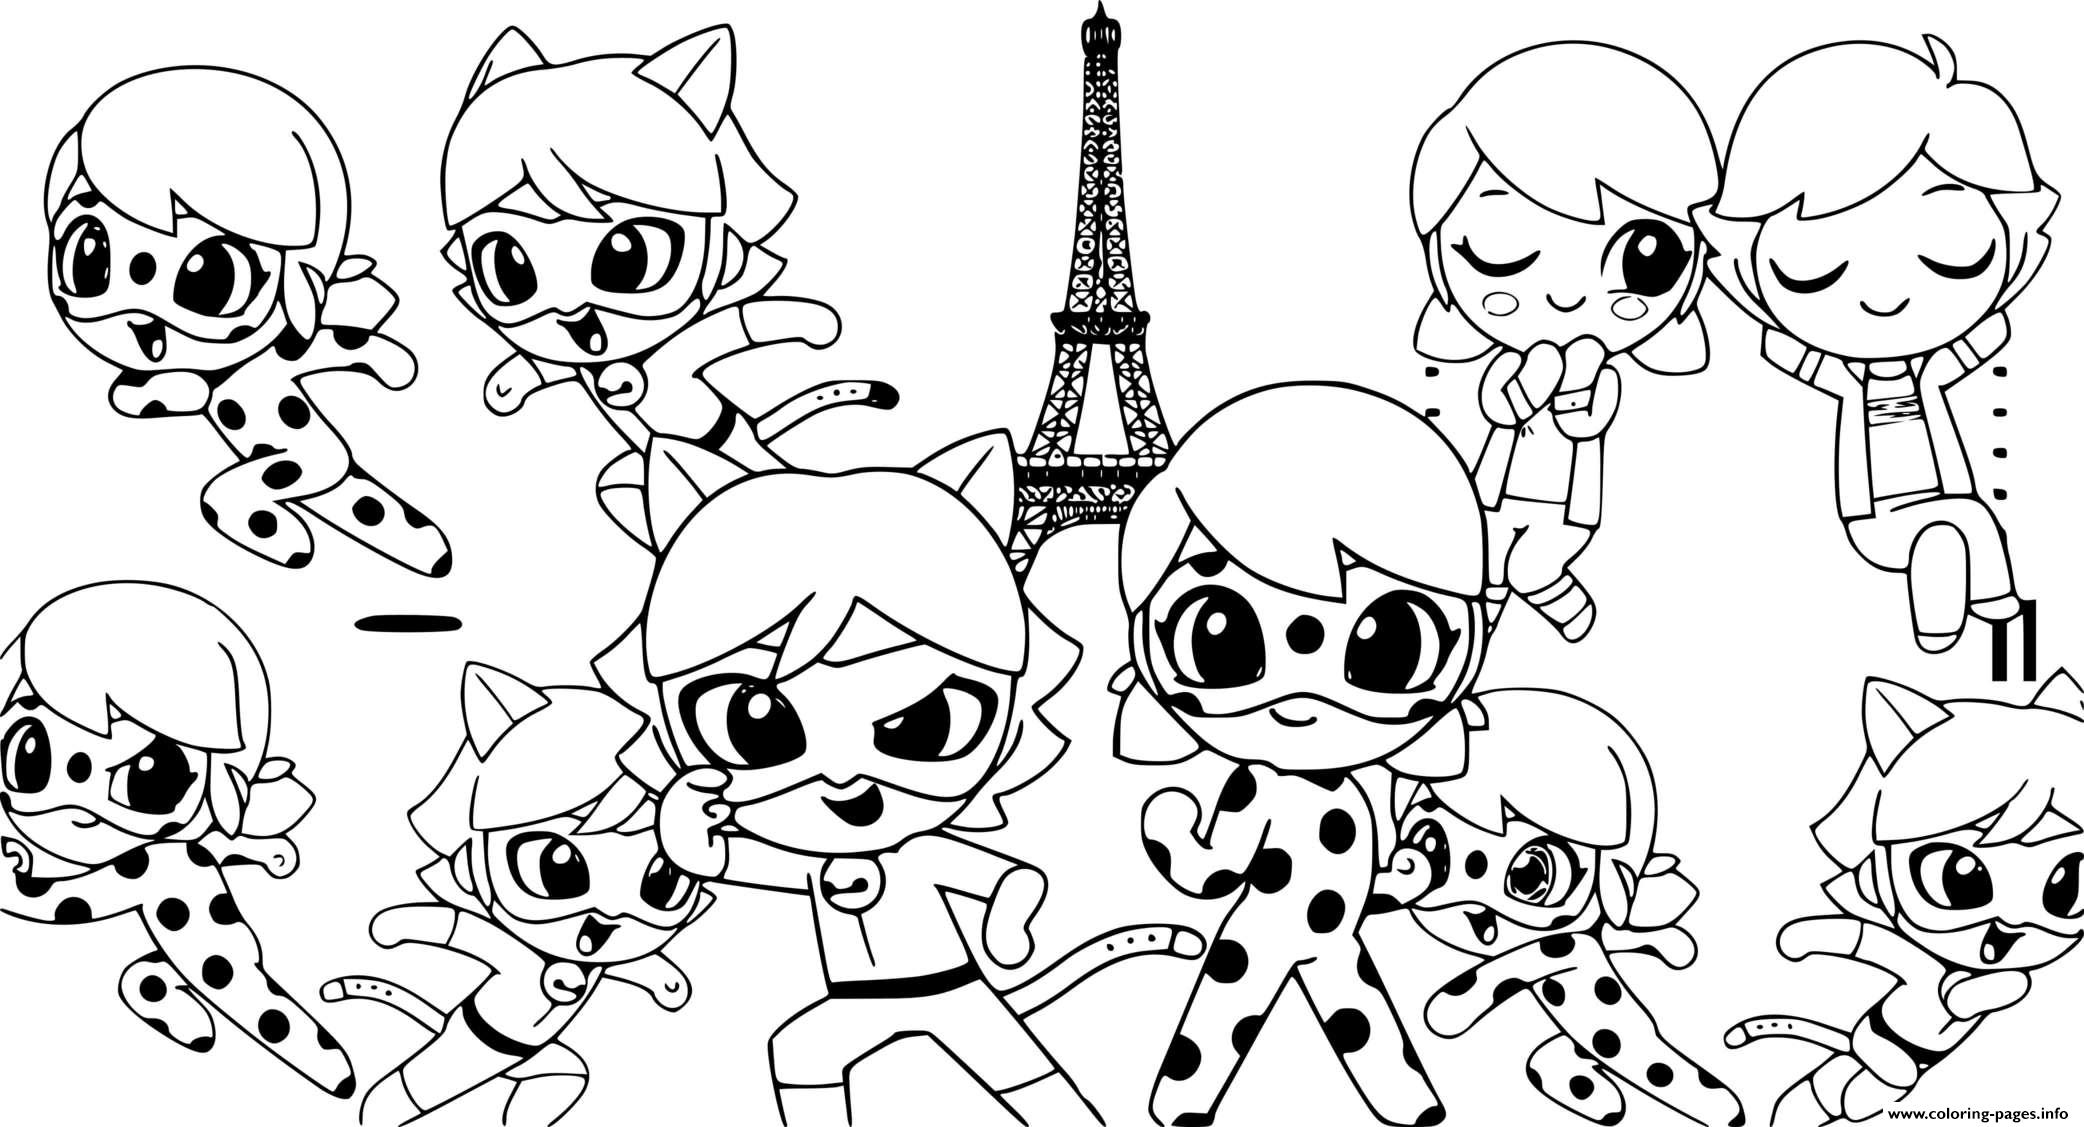 cute-multimouse-chat-noir-kawaii-coloring-page-printable